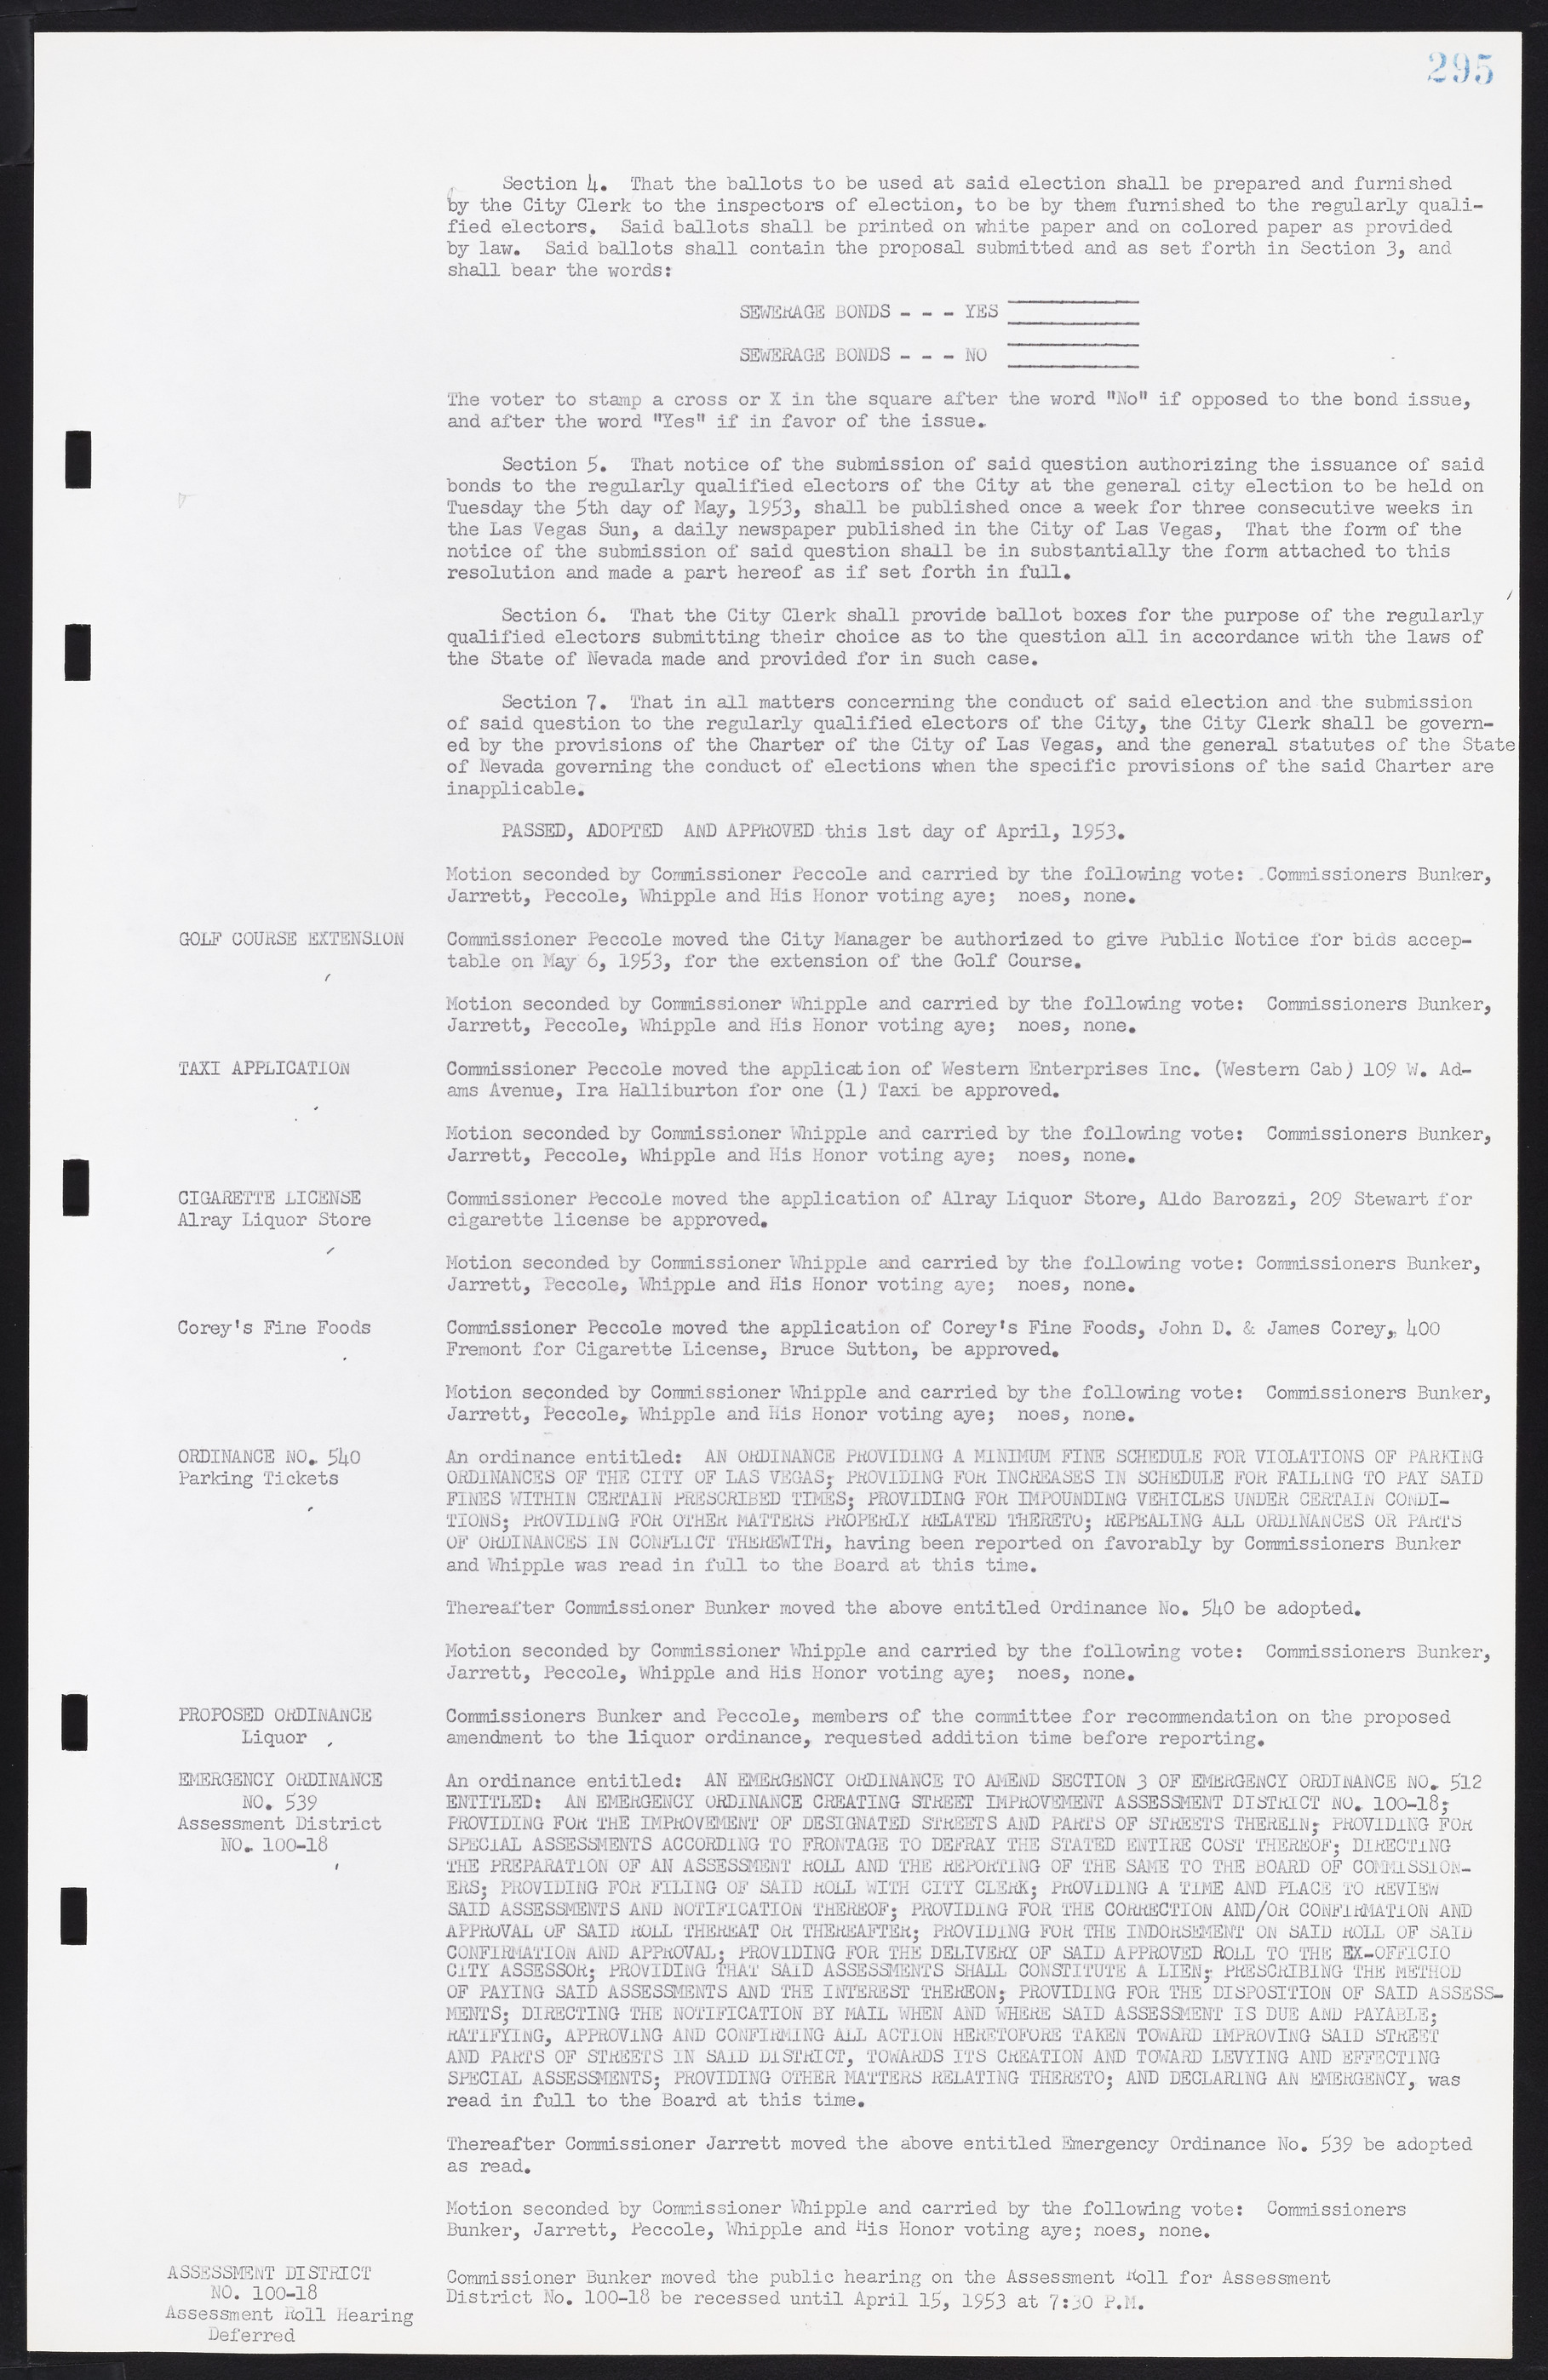 Las Vegas City Commission Minutes, May 26, 1952 to February 17, 1954, lvc000008-323